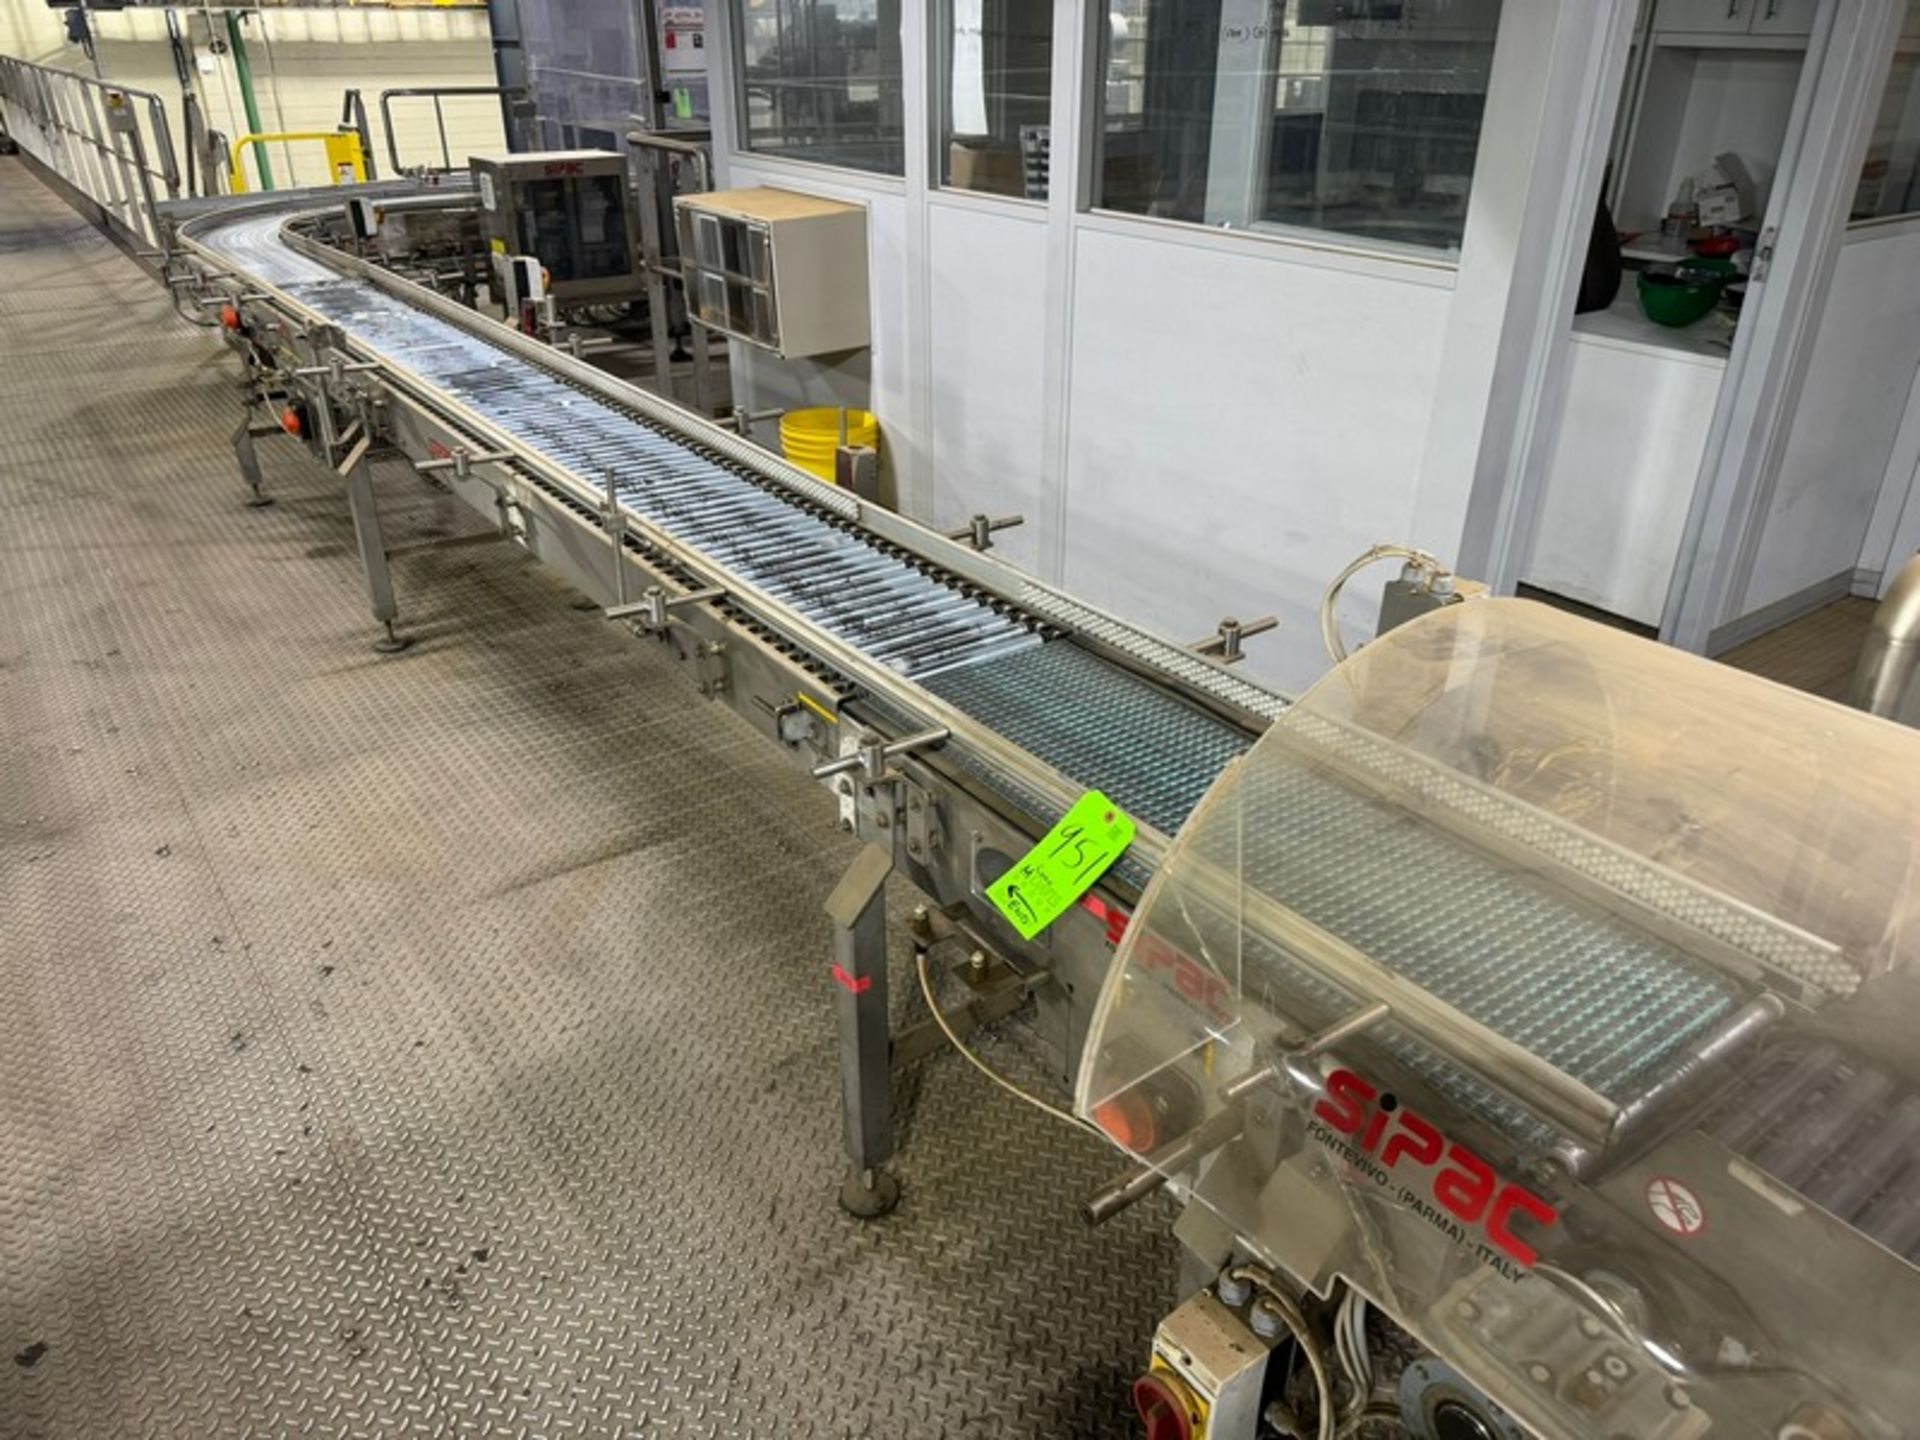 SIPAC Conveyor & Roller Conveyor, with 1-90 Degree Turn, with Aprox. 12” W Conveyor Belt, with - Image 3 of 6